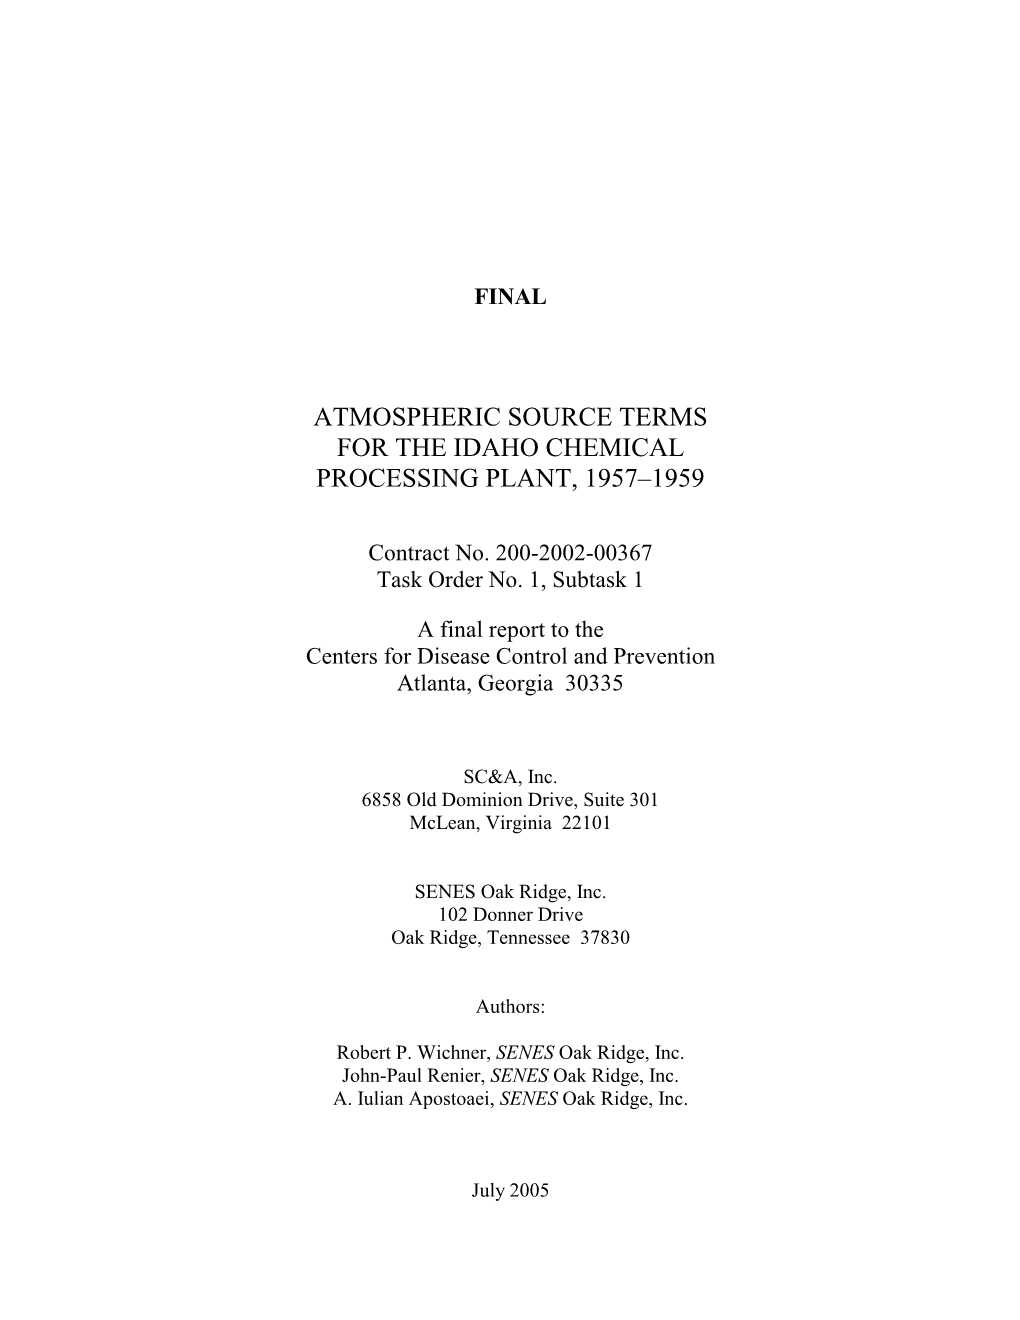 Atmospheric Source Terms for the Idaho Chemical Processing Plant, 1957 – 1959